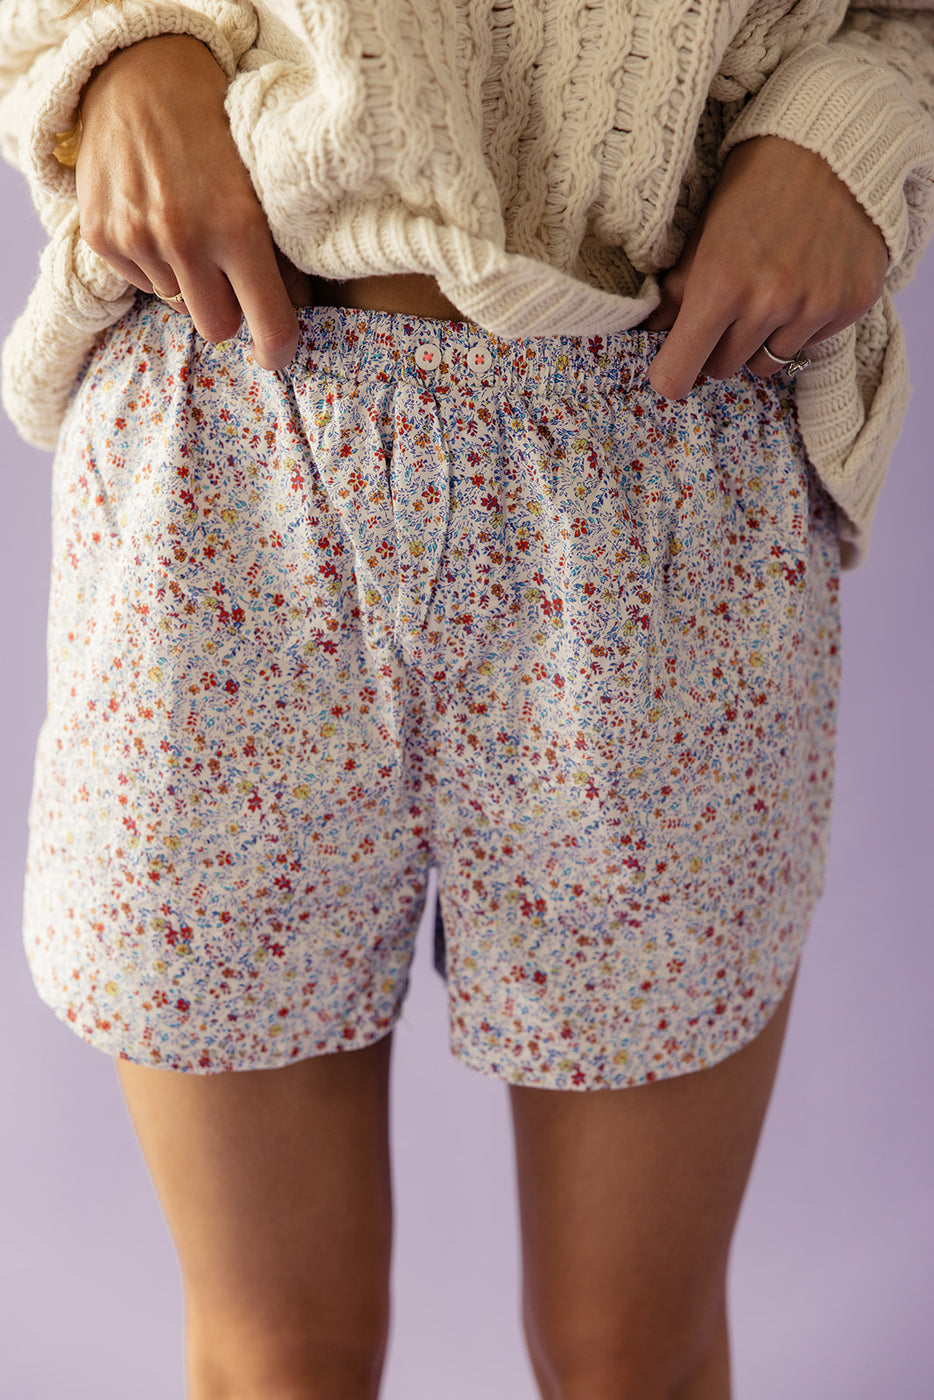 a person wearing shorts with a flower pattern